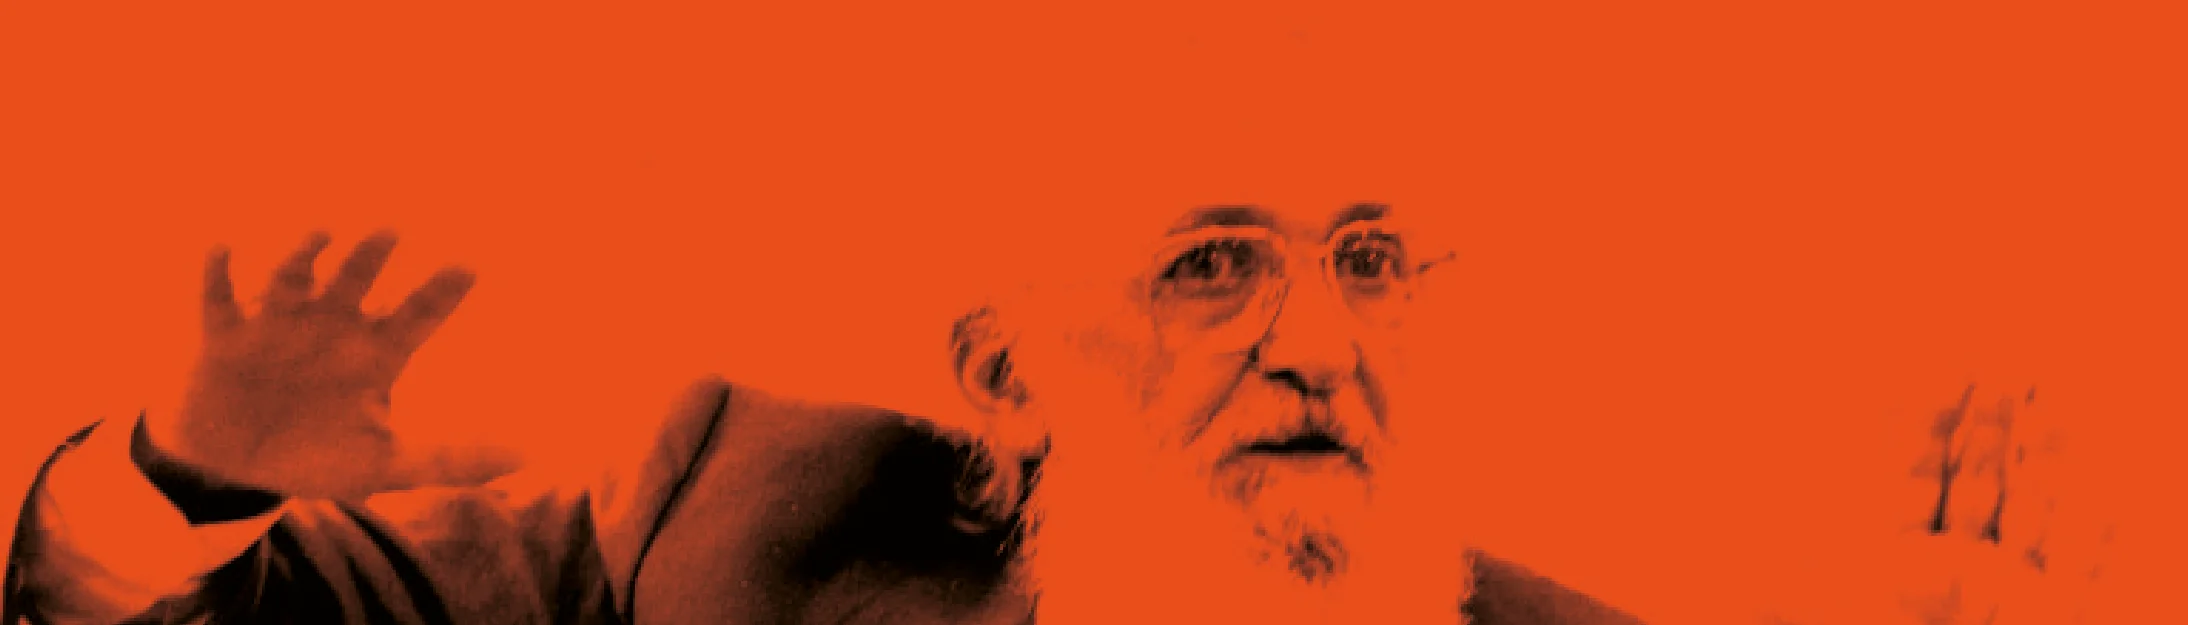 Paulo Freire Banner